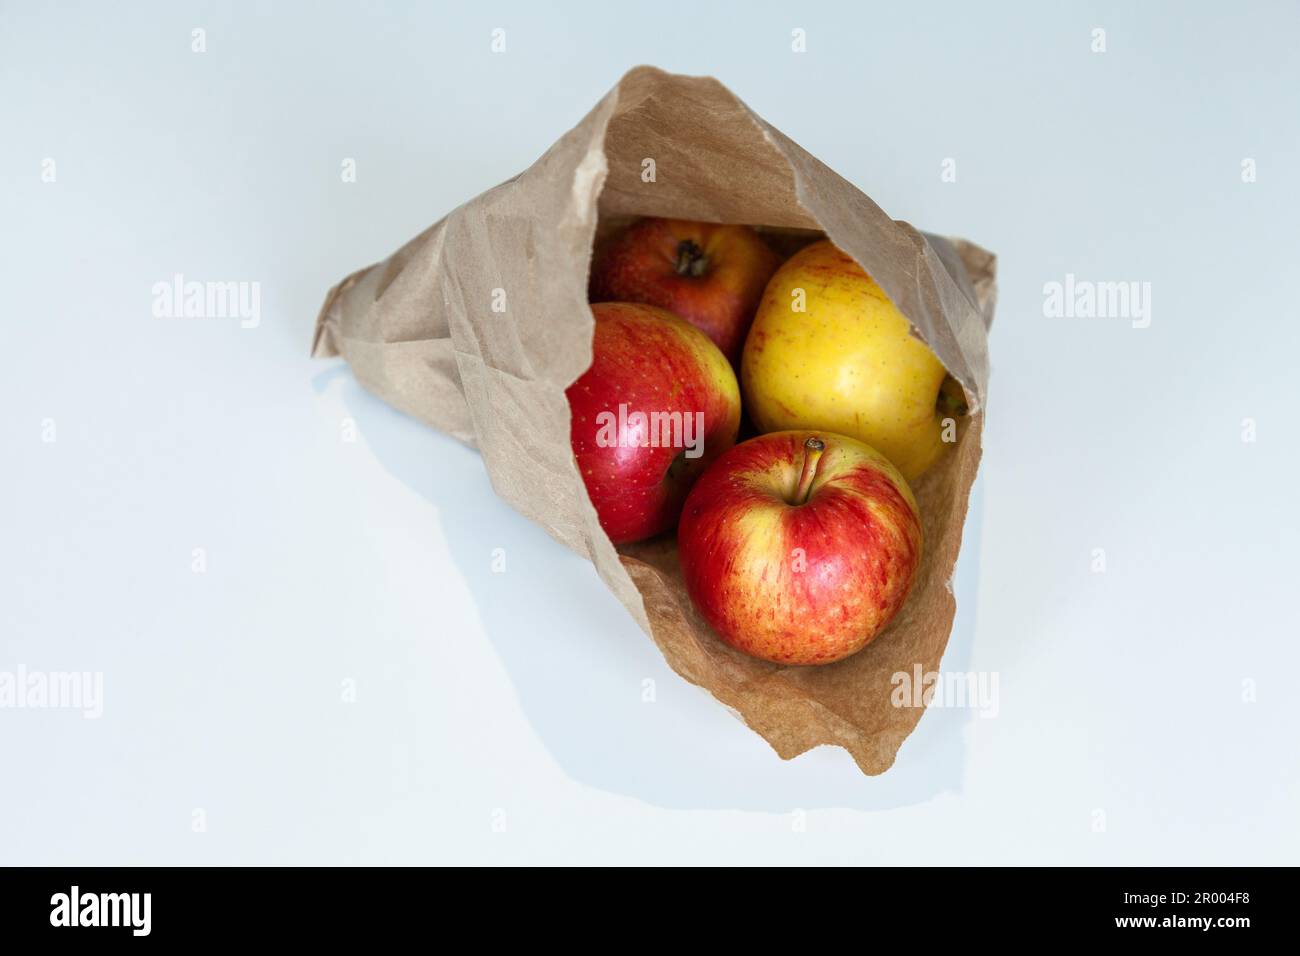 Small organic apples in brown paper bag on white table Stock Photo